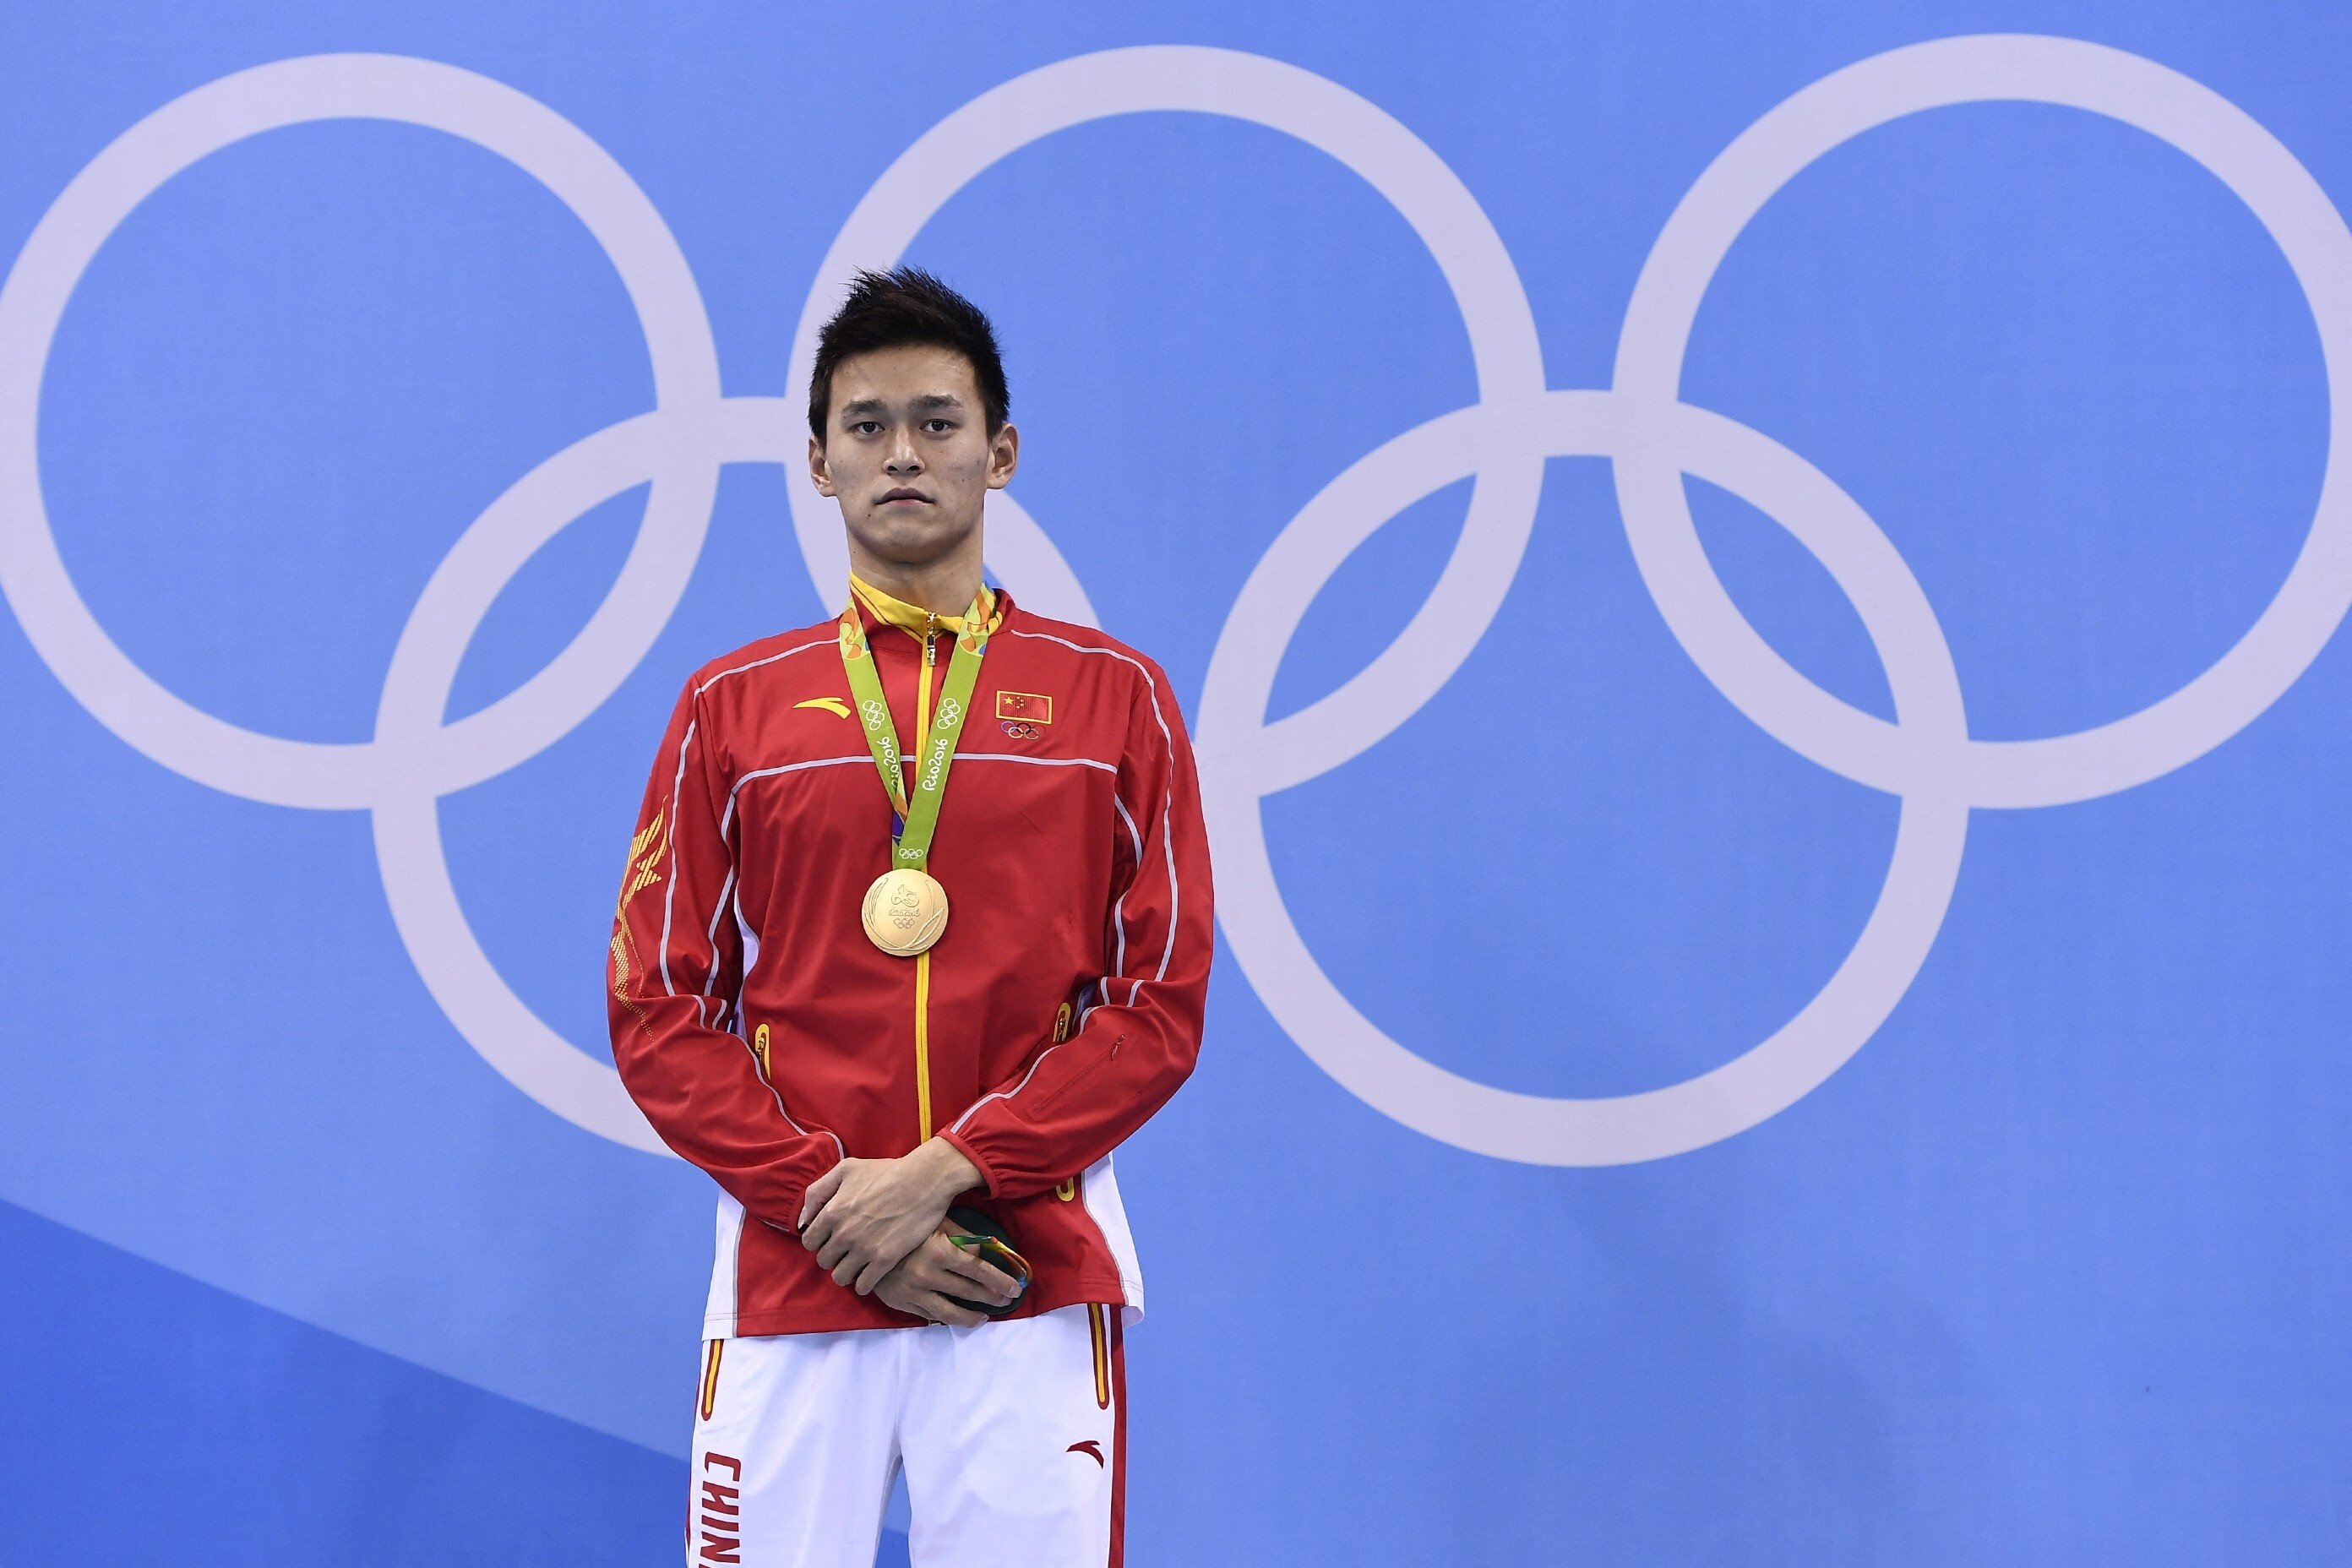 China’s Sun Yang with his gold medal after winning the 200m freestyle at the Rio 2016 Olympic Games. Photo: AFP